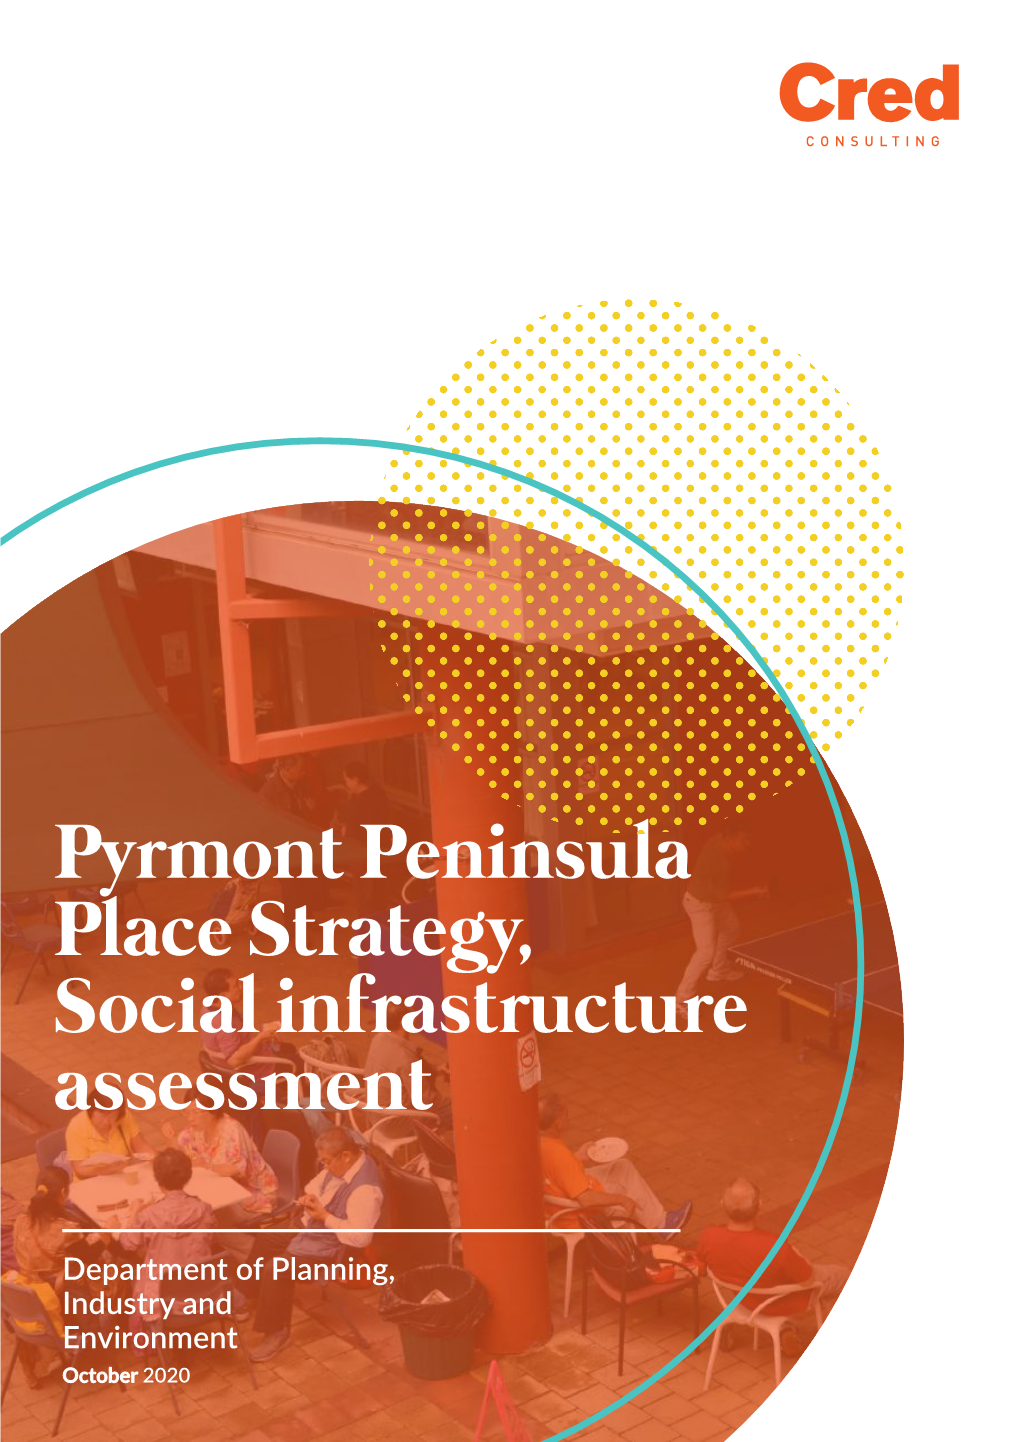 Pyrmont Peninsula Place Strategy, Social Infrastructure Assessment